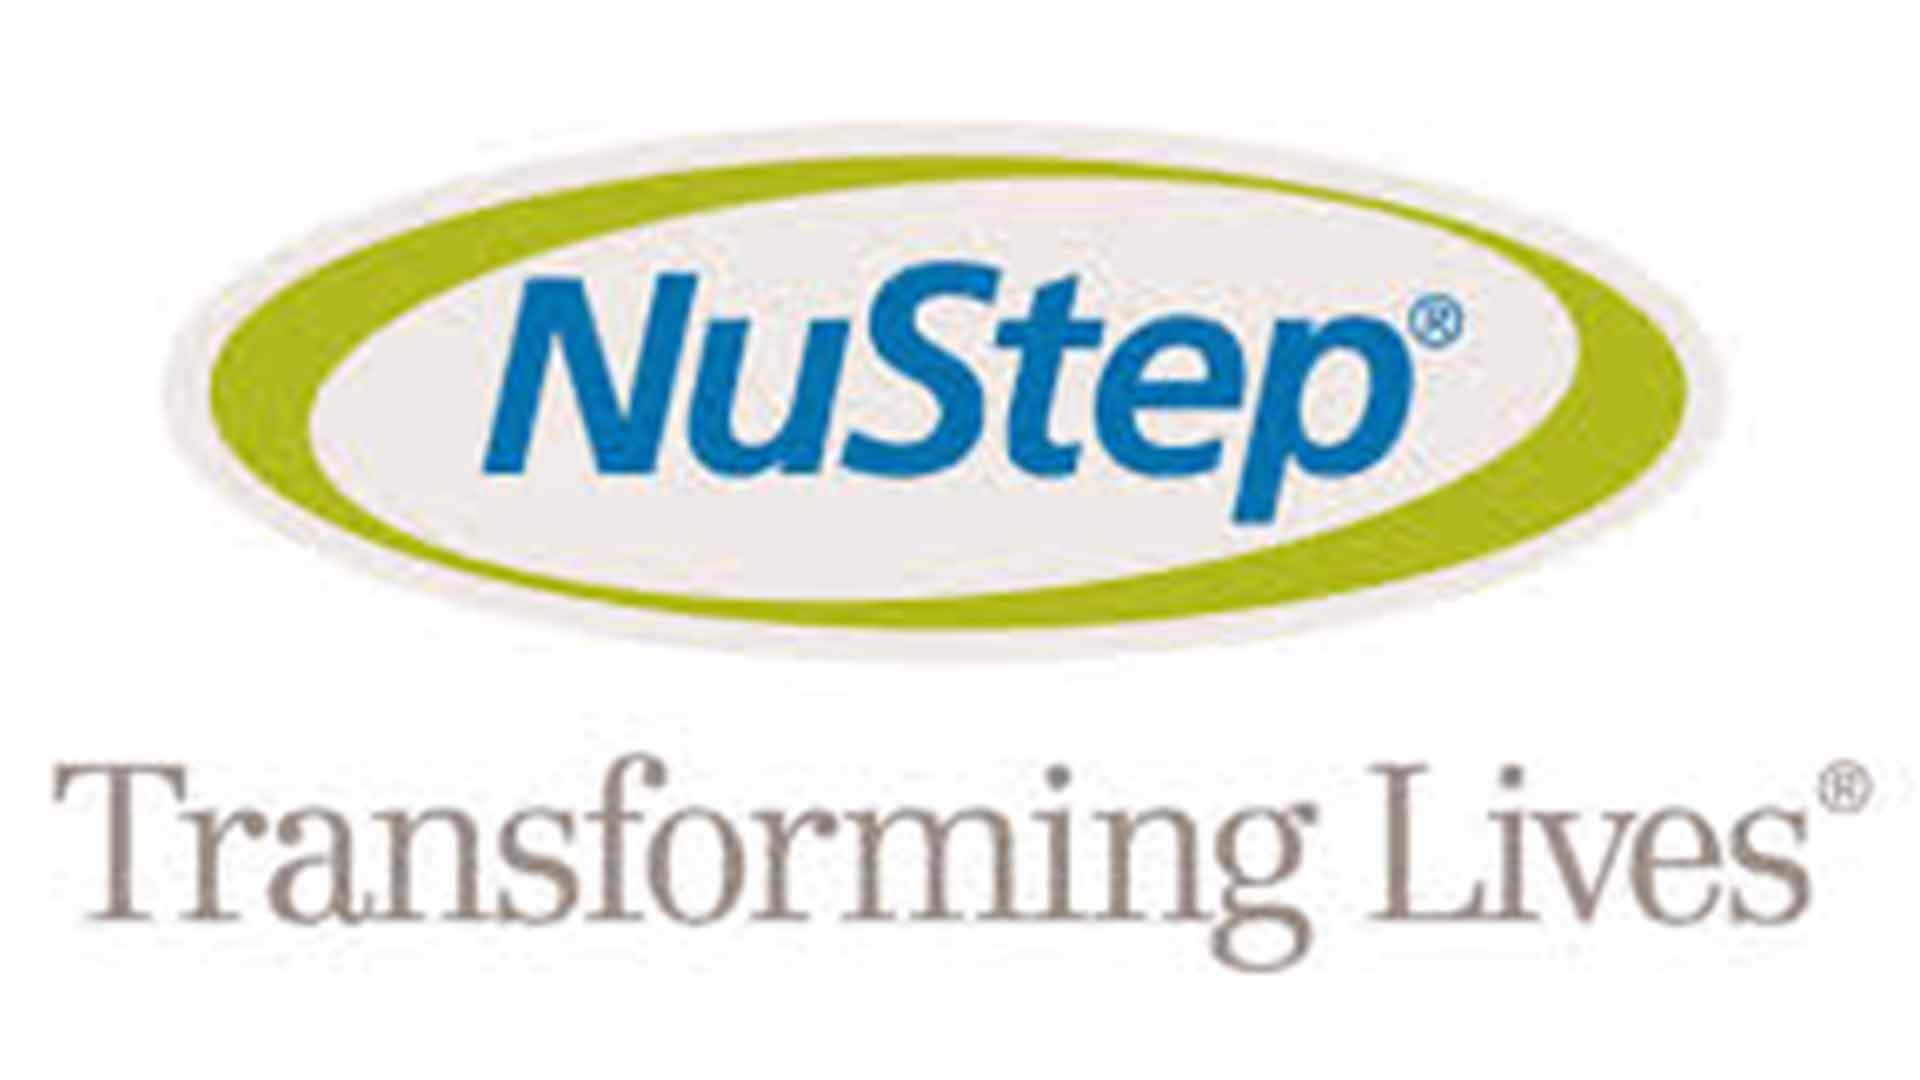 A nustep logo is shown next to the words " transforming lives ".